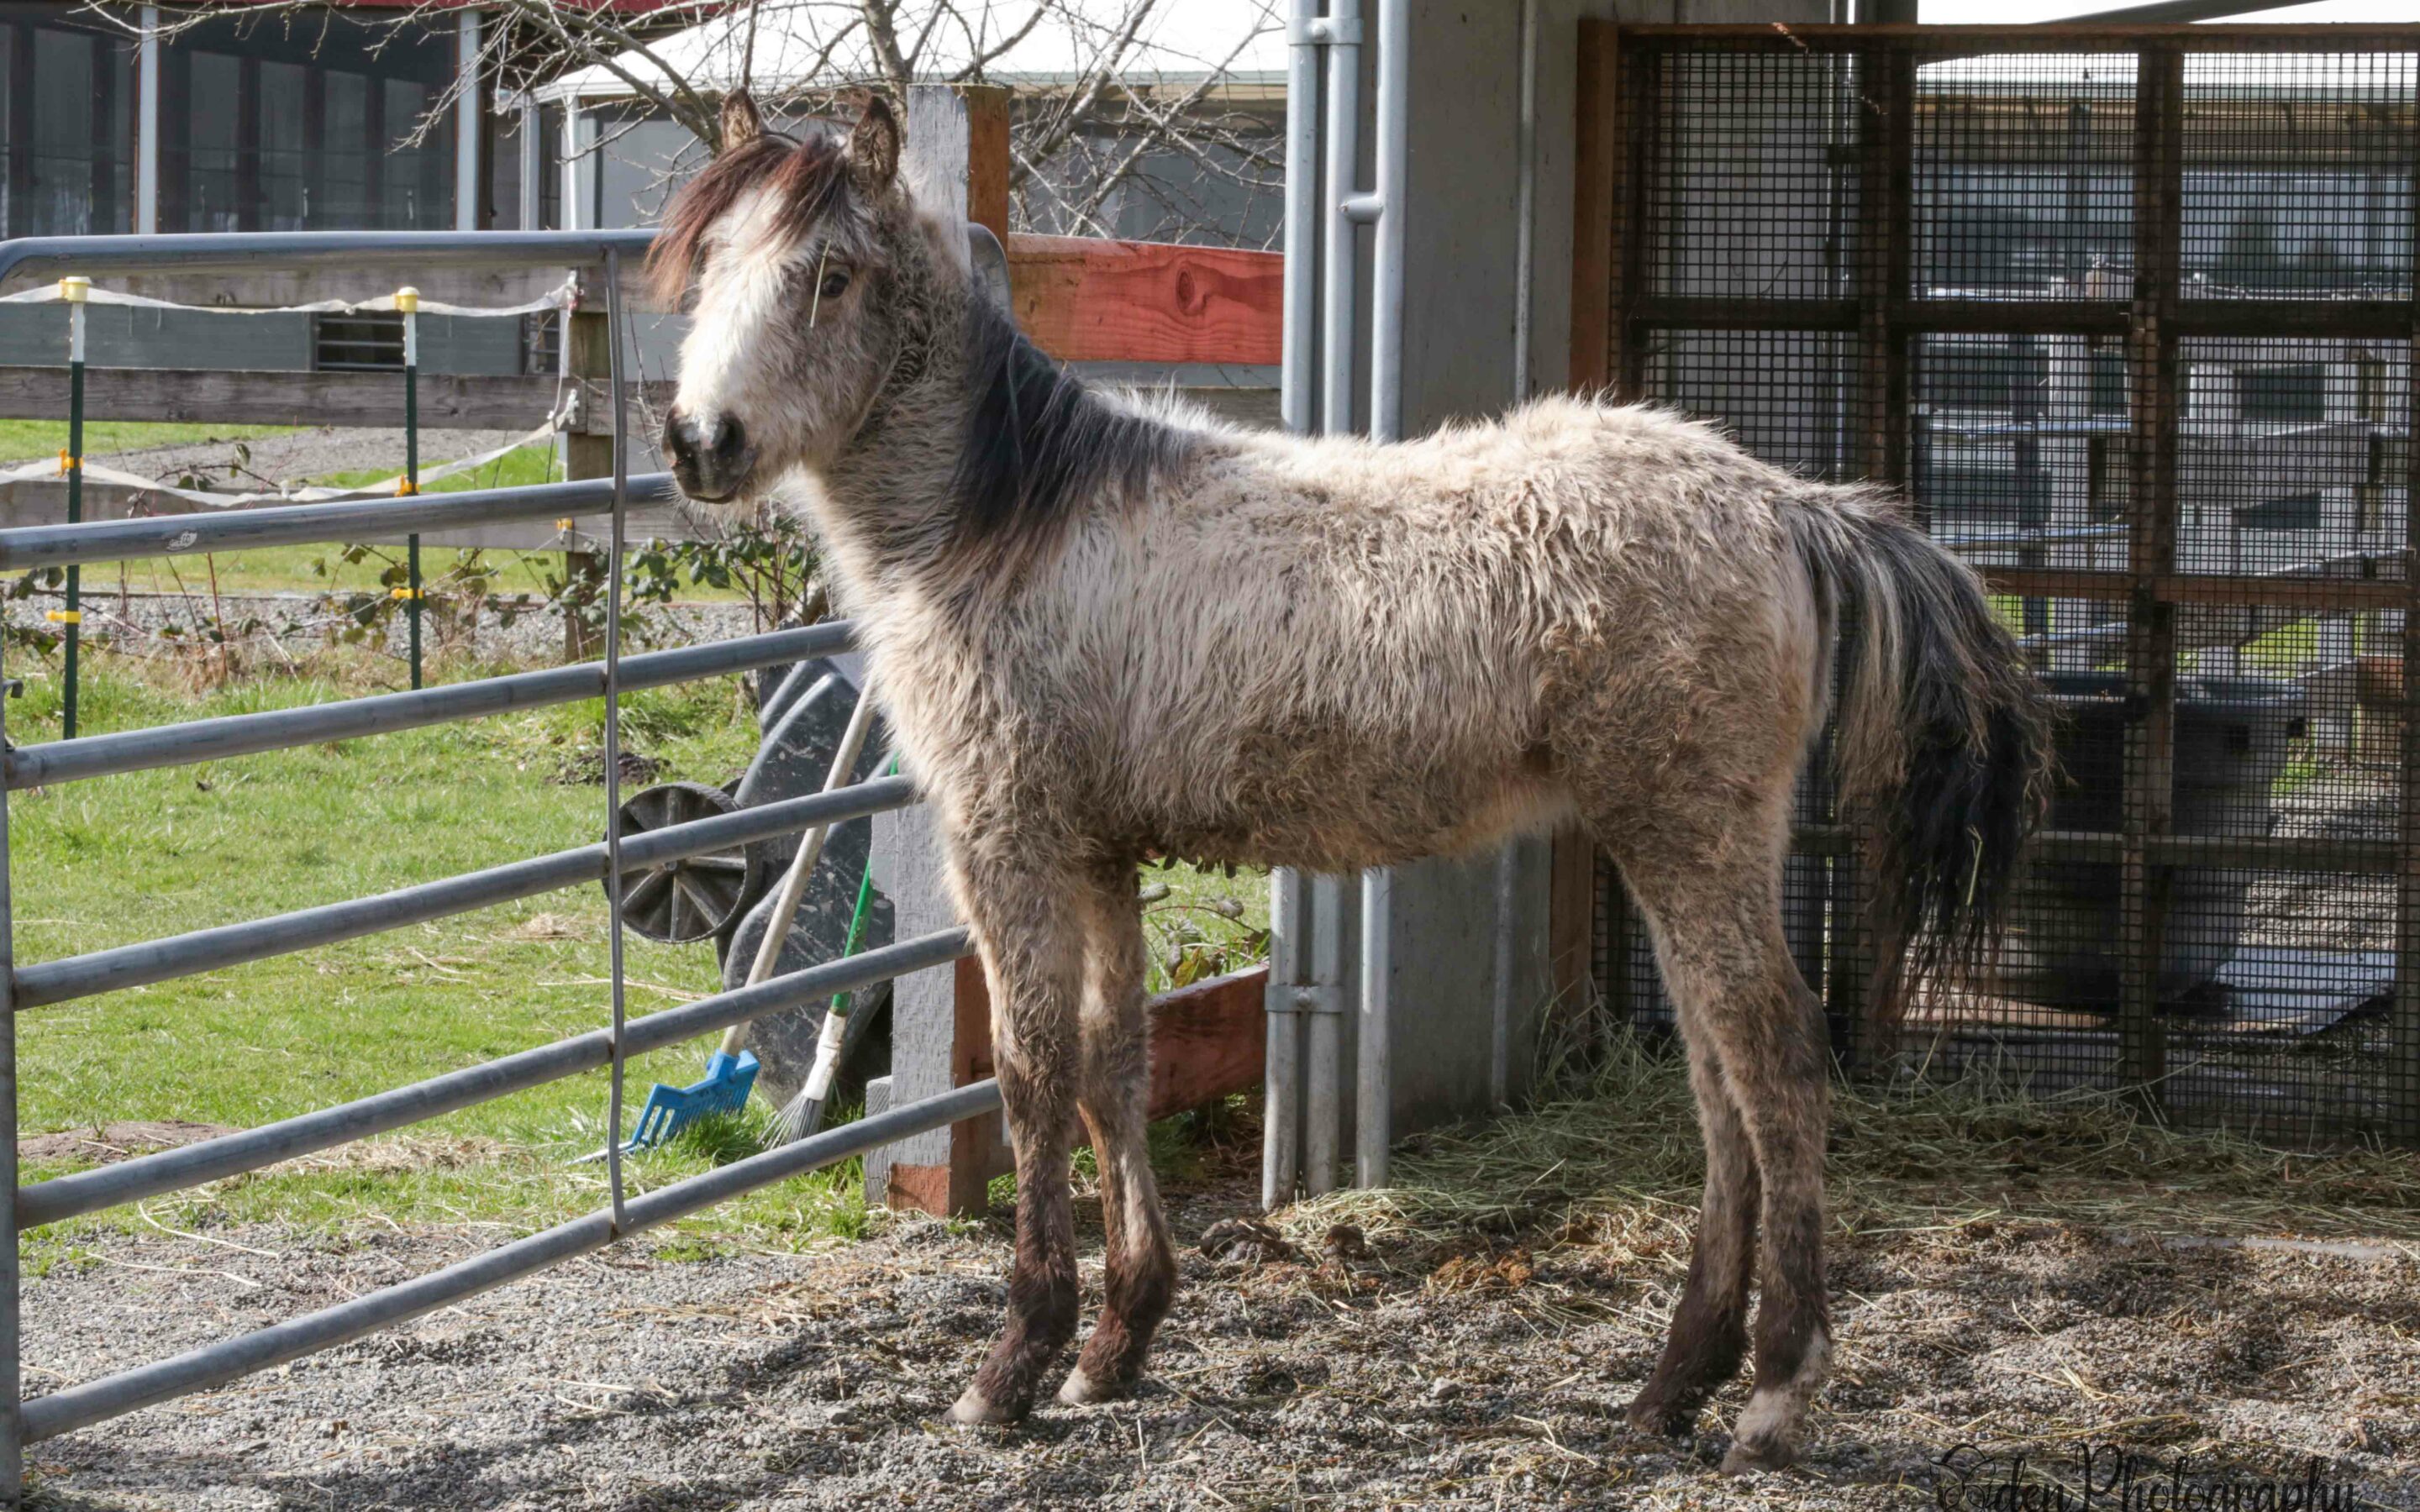 A New Horse at SAFE: meet Frosting!